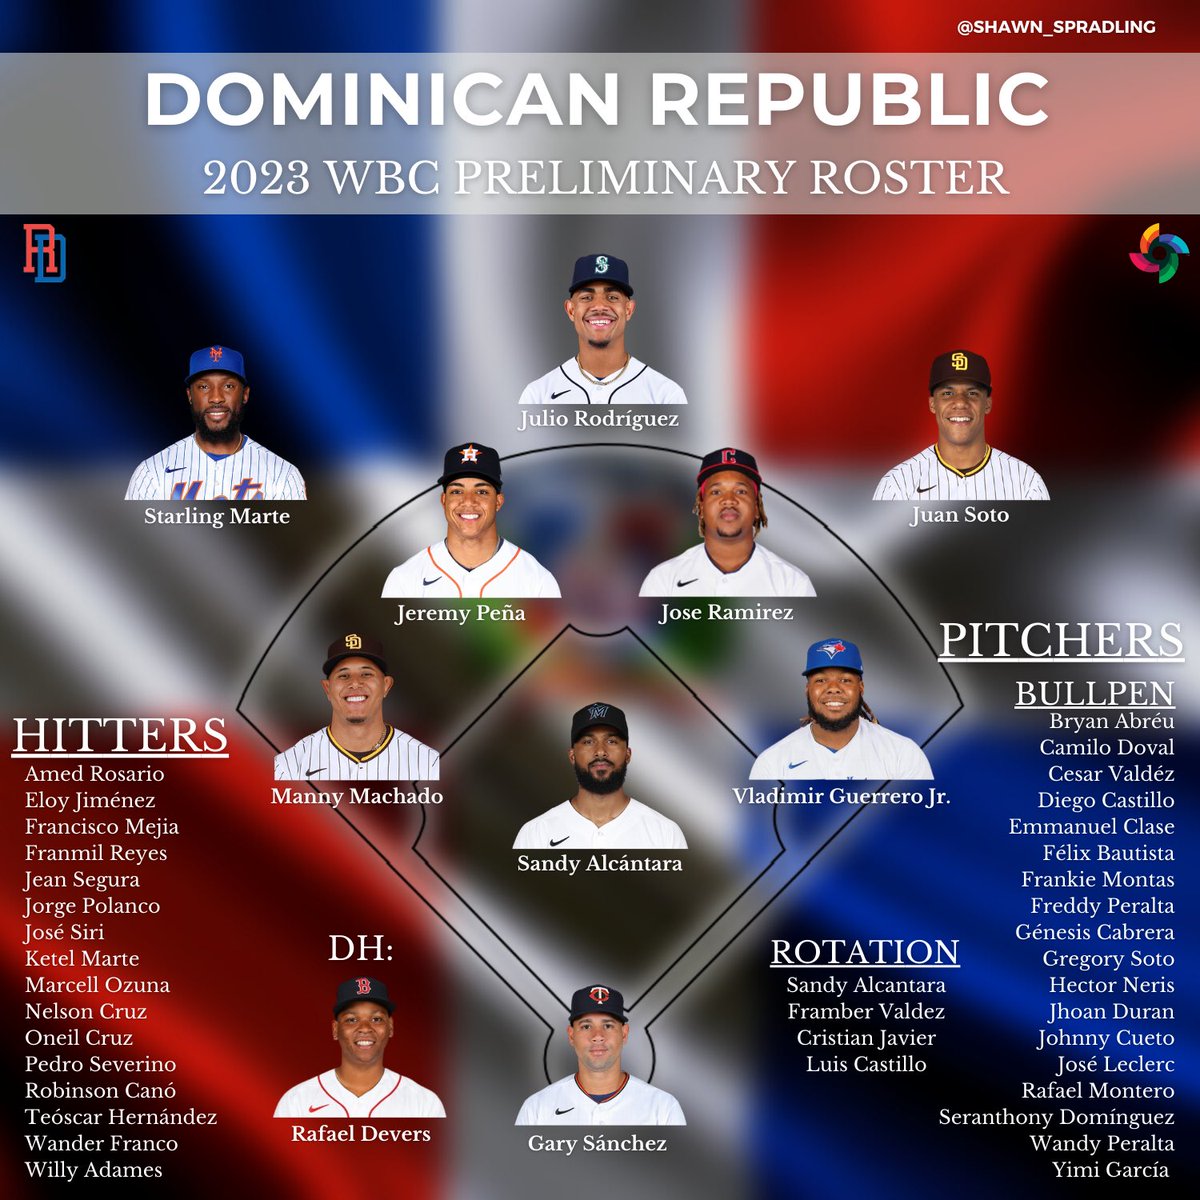 Shawn on Twitter "Dominican Republic Preliminary WBC Roster 🇩🇴"